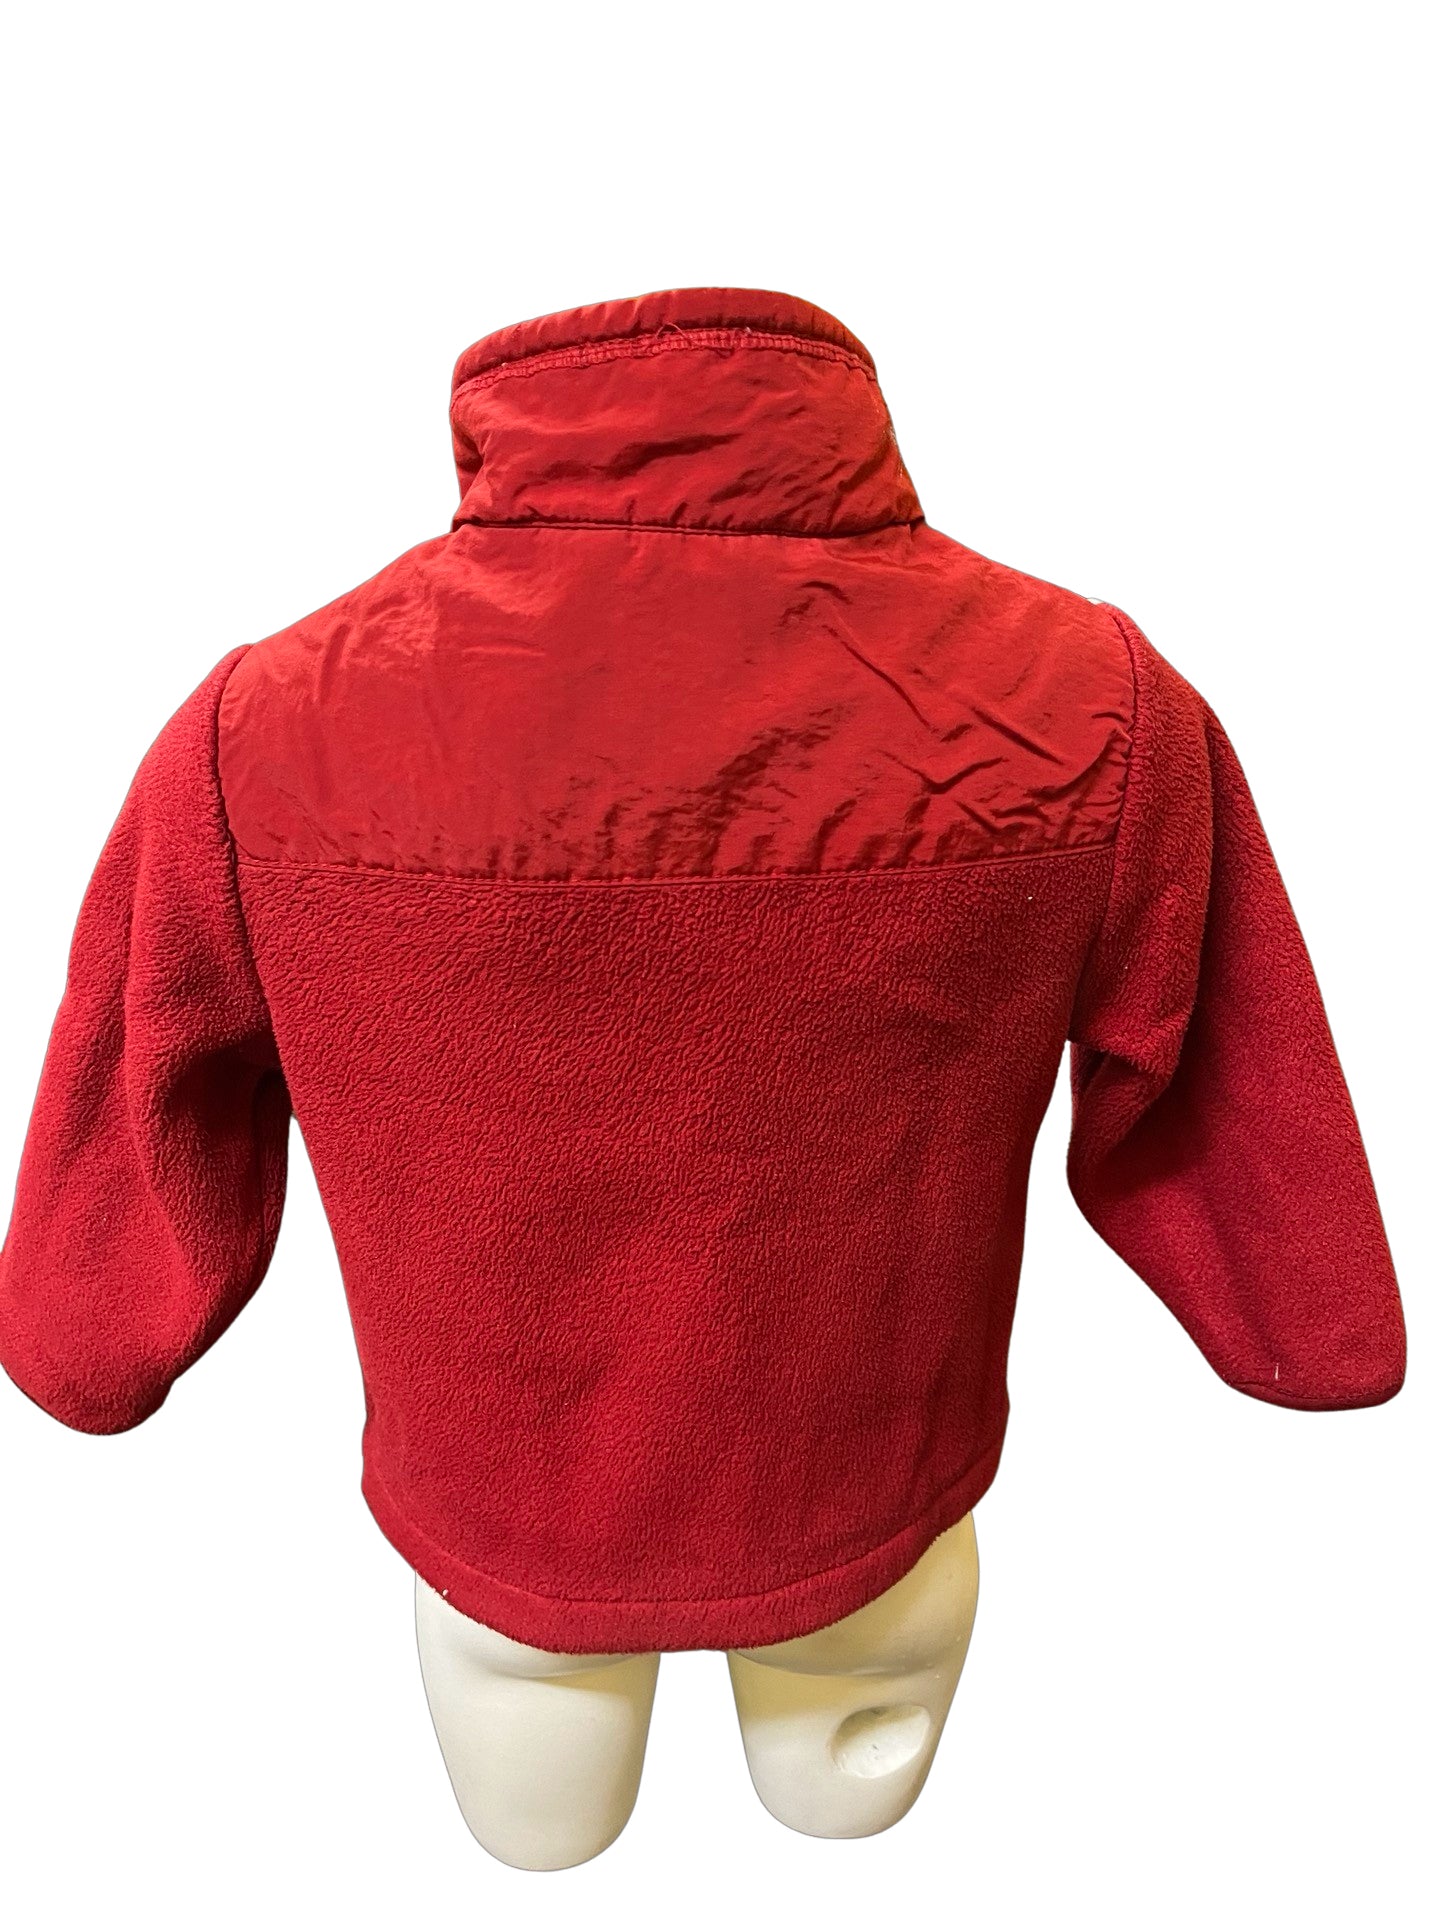 Children's Place Size 3t Red Jacket - boys